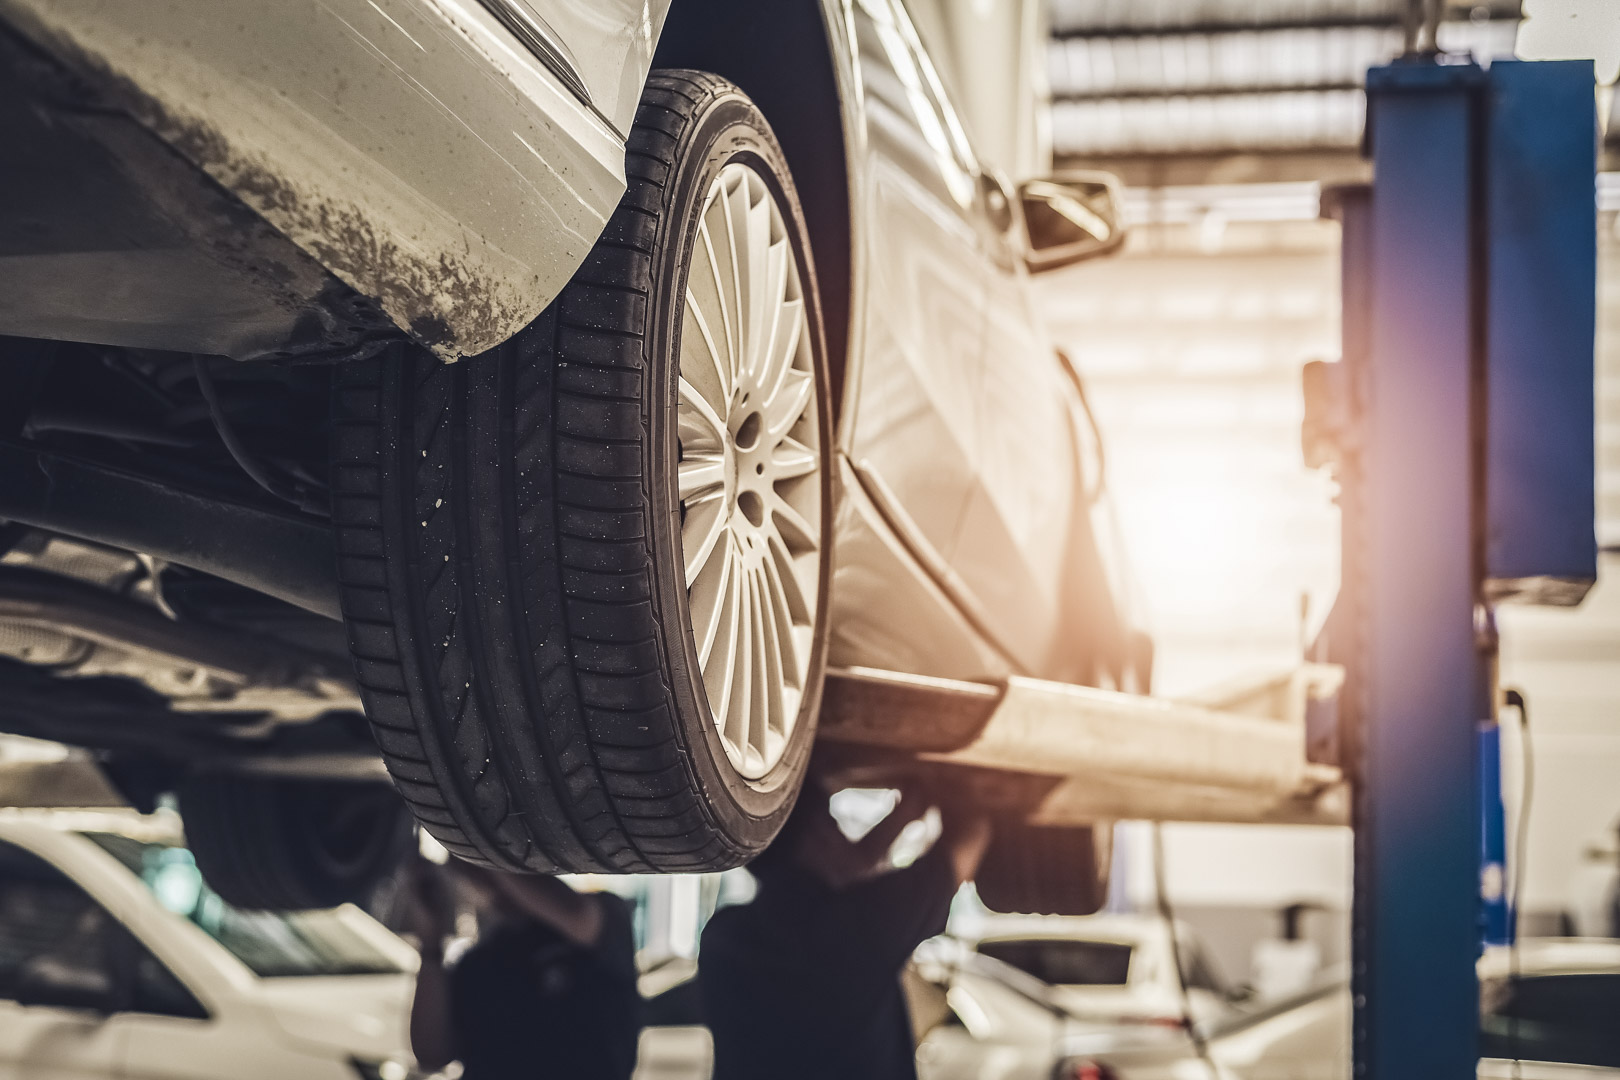 Metal Auto Shops is The Best Choice for your Auto Repair Business.